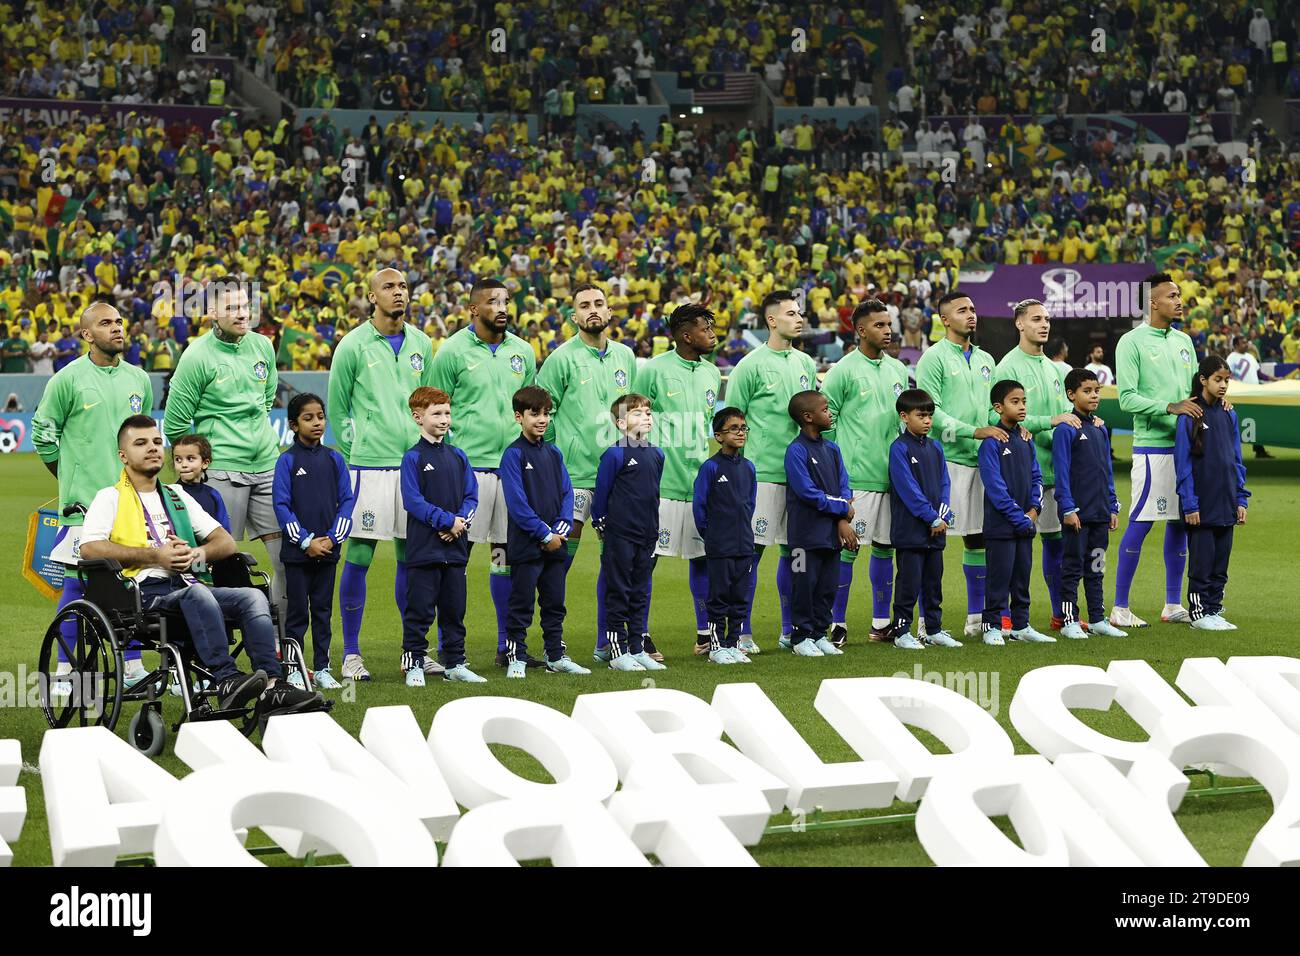 LUSAIL CITY - Line up Brazil with Brazil goalkeeper Emerson, Fabinho of Brazil, Gleison Bremer of Brazil, Alex Telles of Brazil, Eder Militao of Brazil, Gabriel Jesus of Brazil, Dani Alves of Brazil, Fred of Brazil, Rodrigo of Brazil, Vinicius Junior of Brazil, Antony of Brazil during the FIFA World Cup Qatar 2022 group G match between Cameroon and Brazil at Lusail Stadium on December 2, 2022 in Lusail City, Qatar. ANP | Hollandse Hoogte | MAURICE VAN STEEN Stock Photo